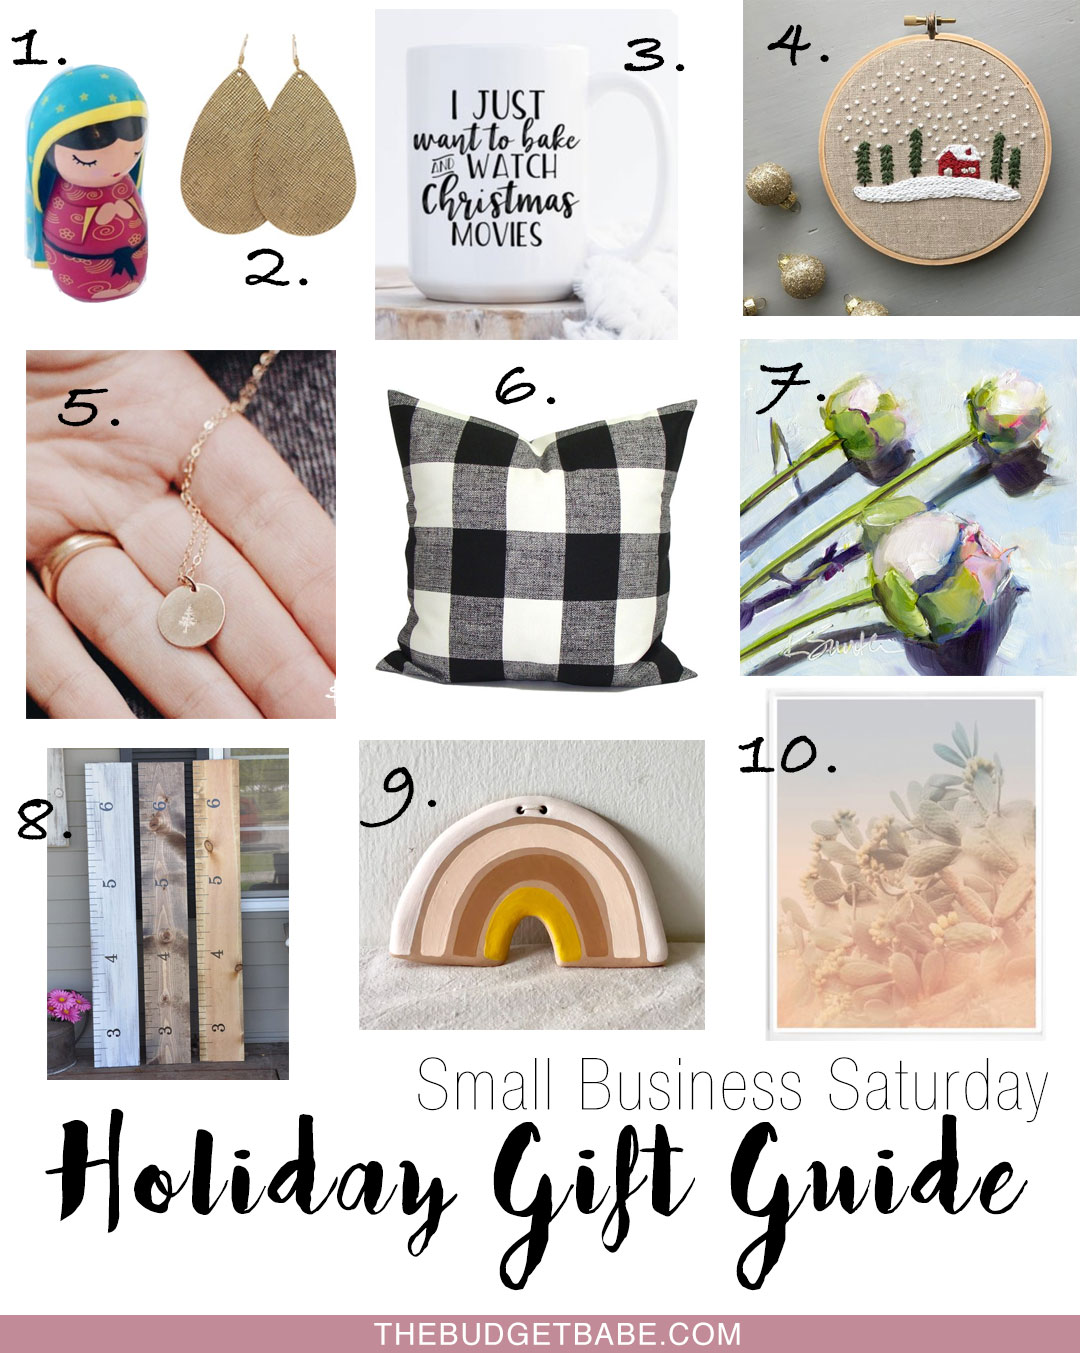 Holiday gift ideas from small business owners - love these!